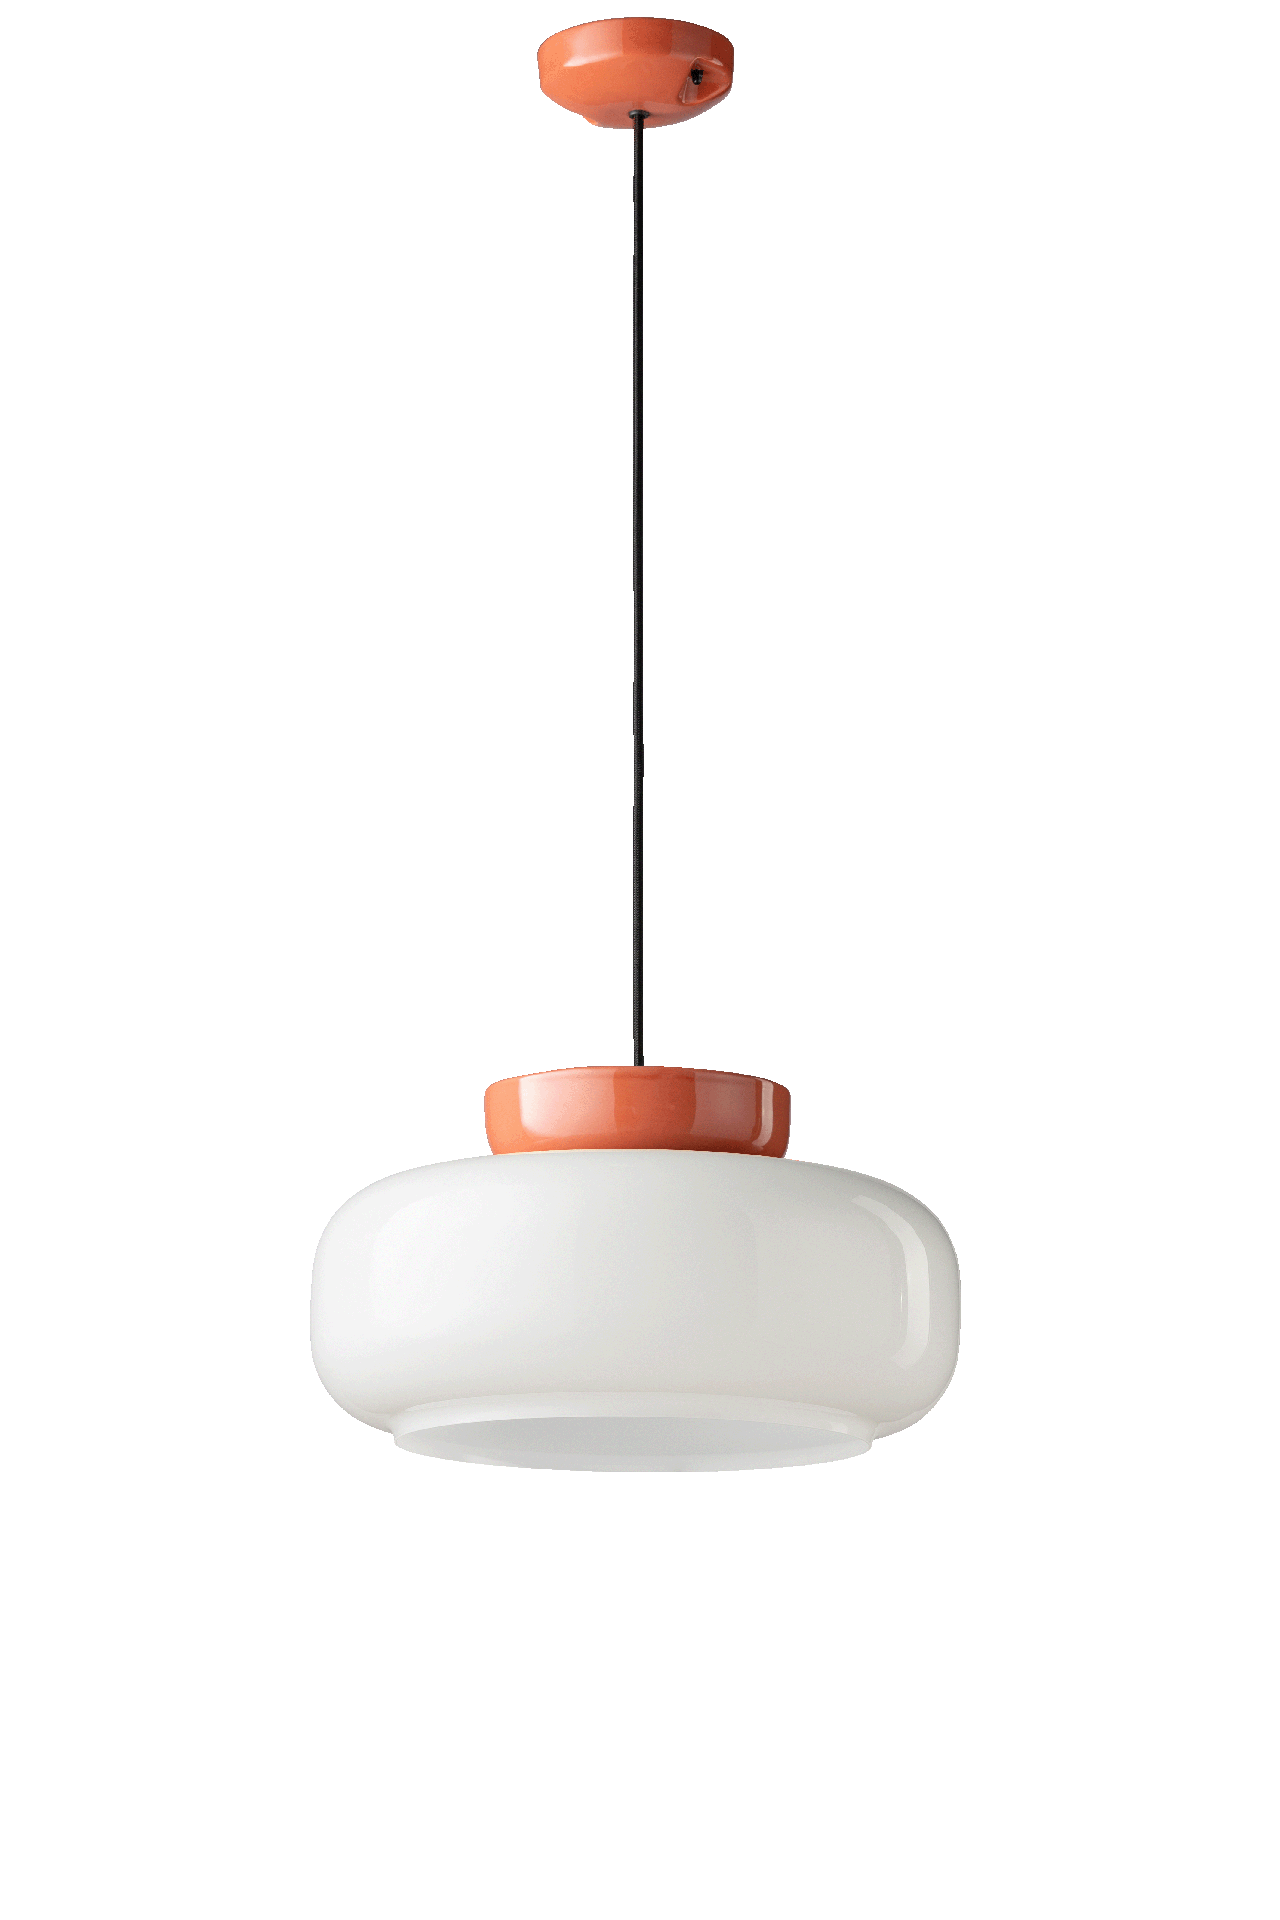 Morrocan Contemporary lights White Glass 